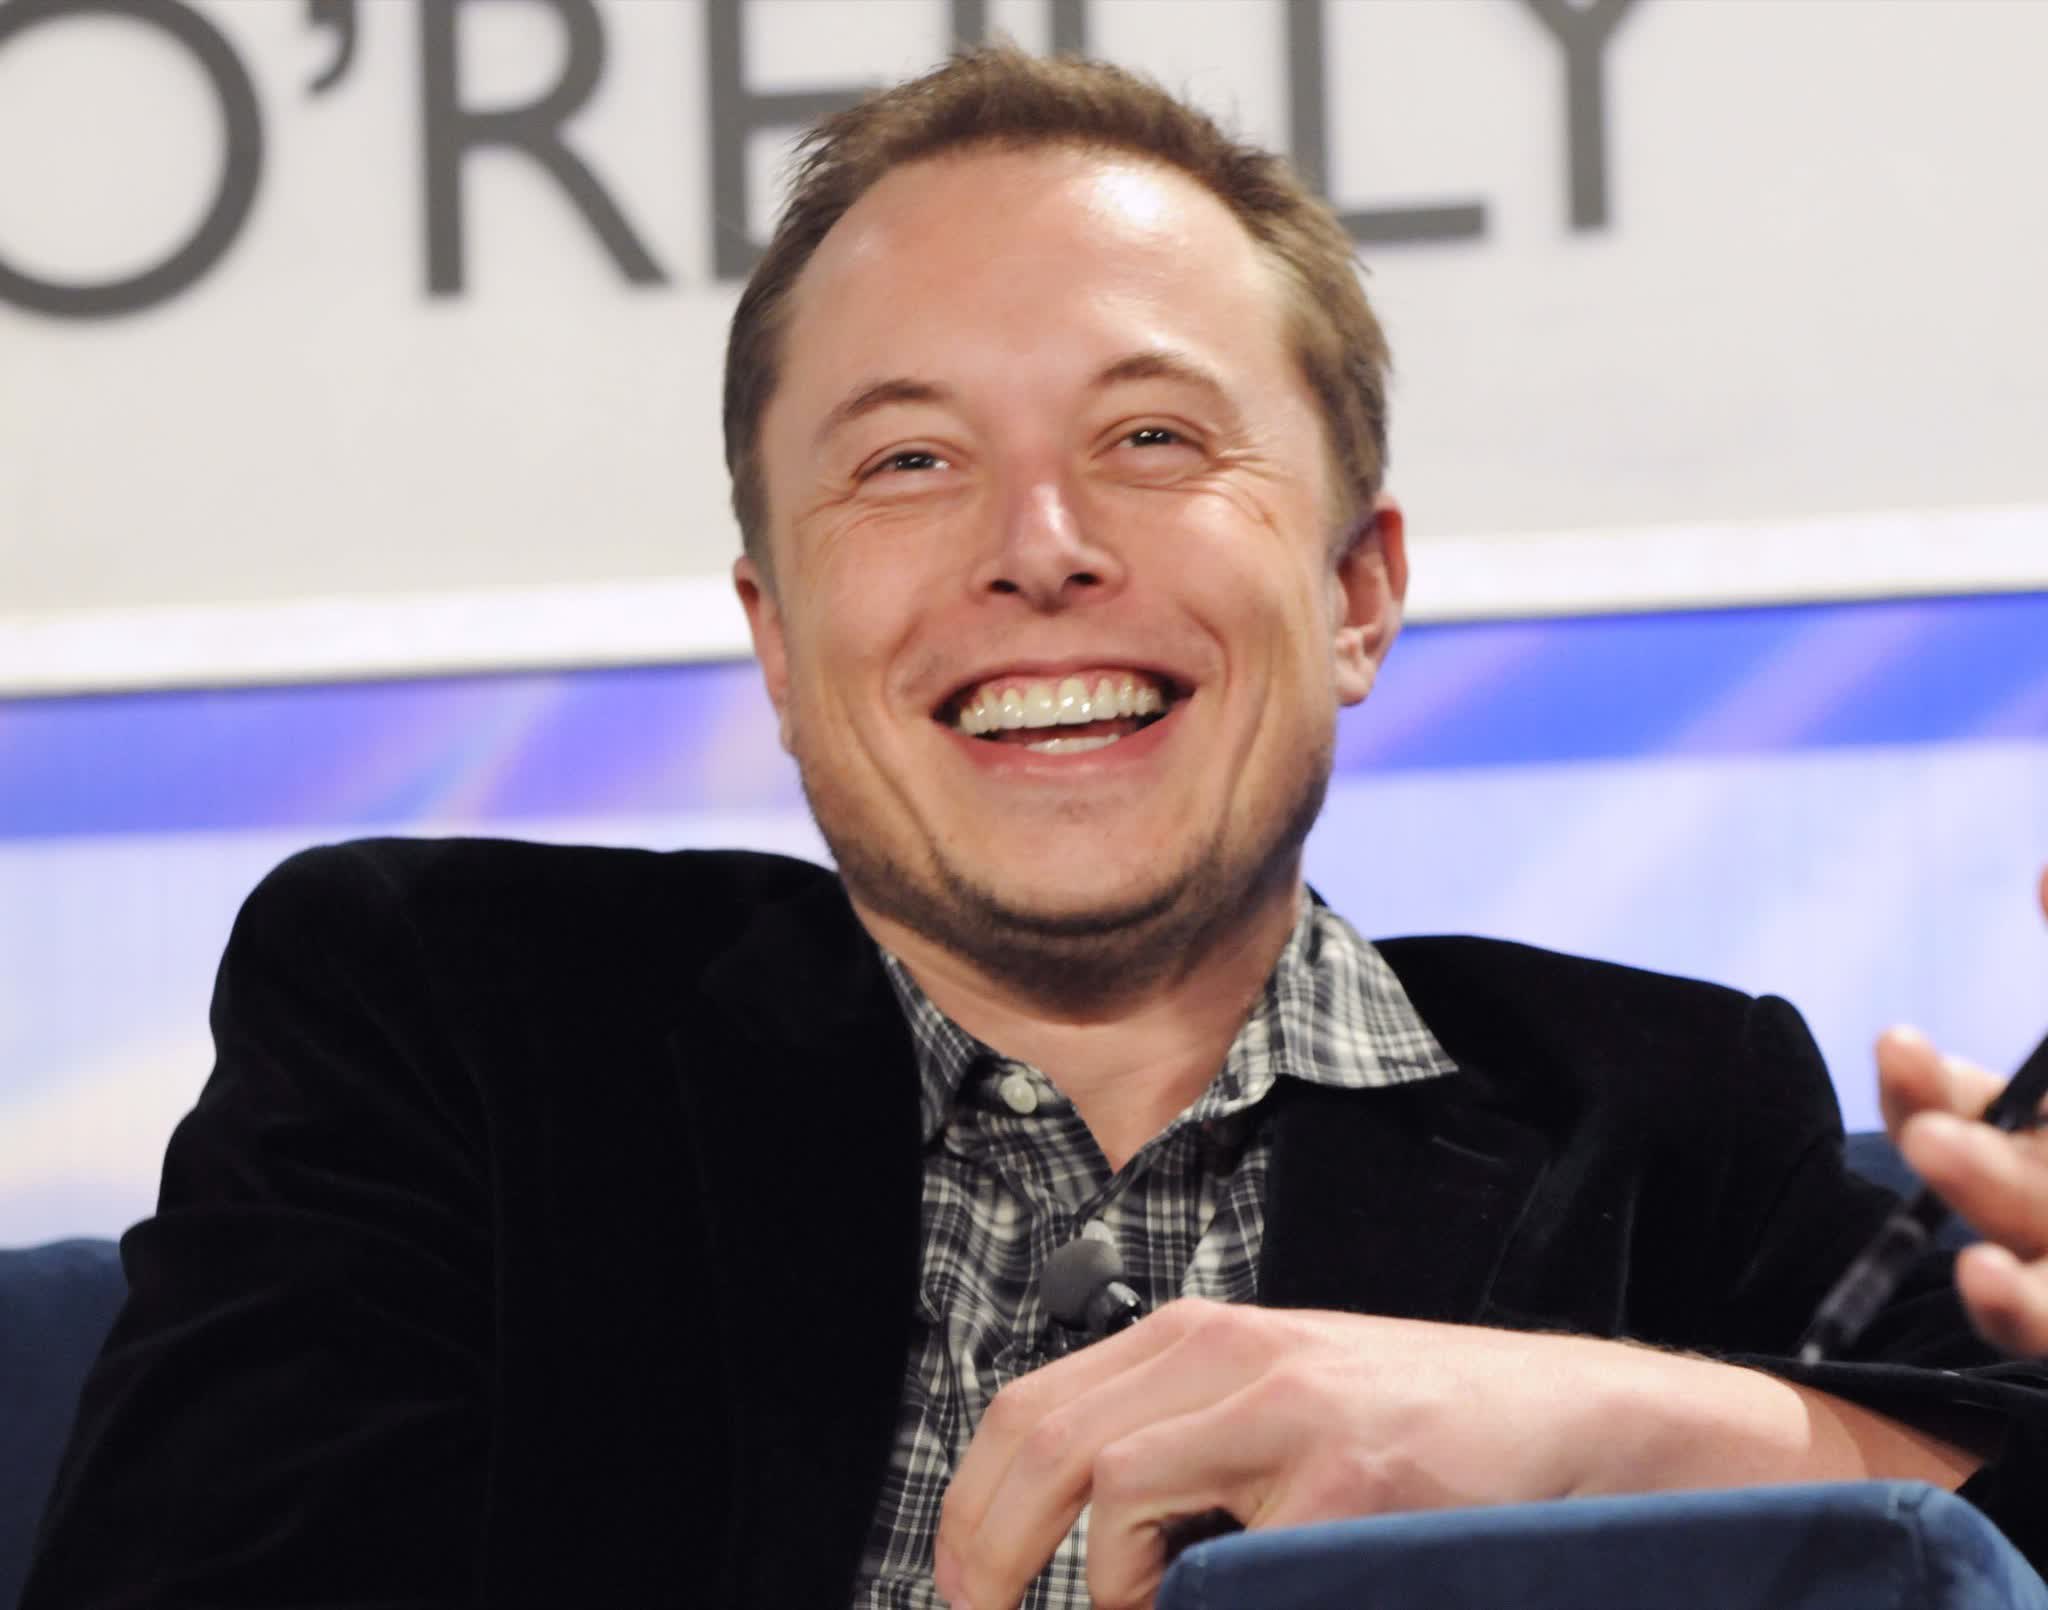 Satirical Tweet led thousands to think Twitter suspended Musk over collapsed acquisition